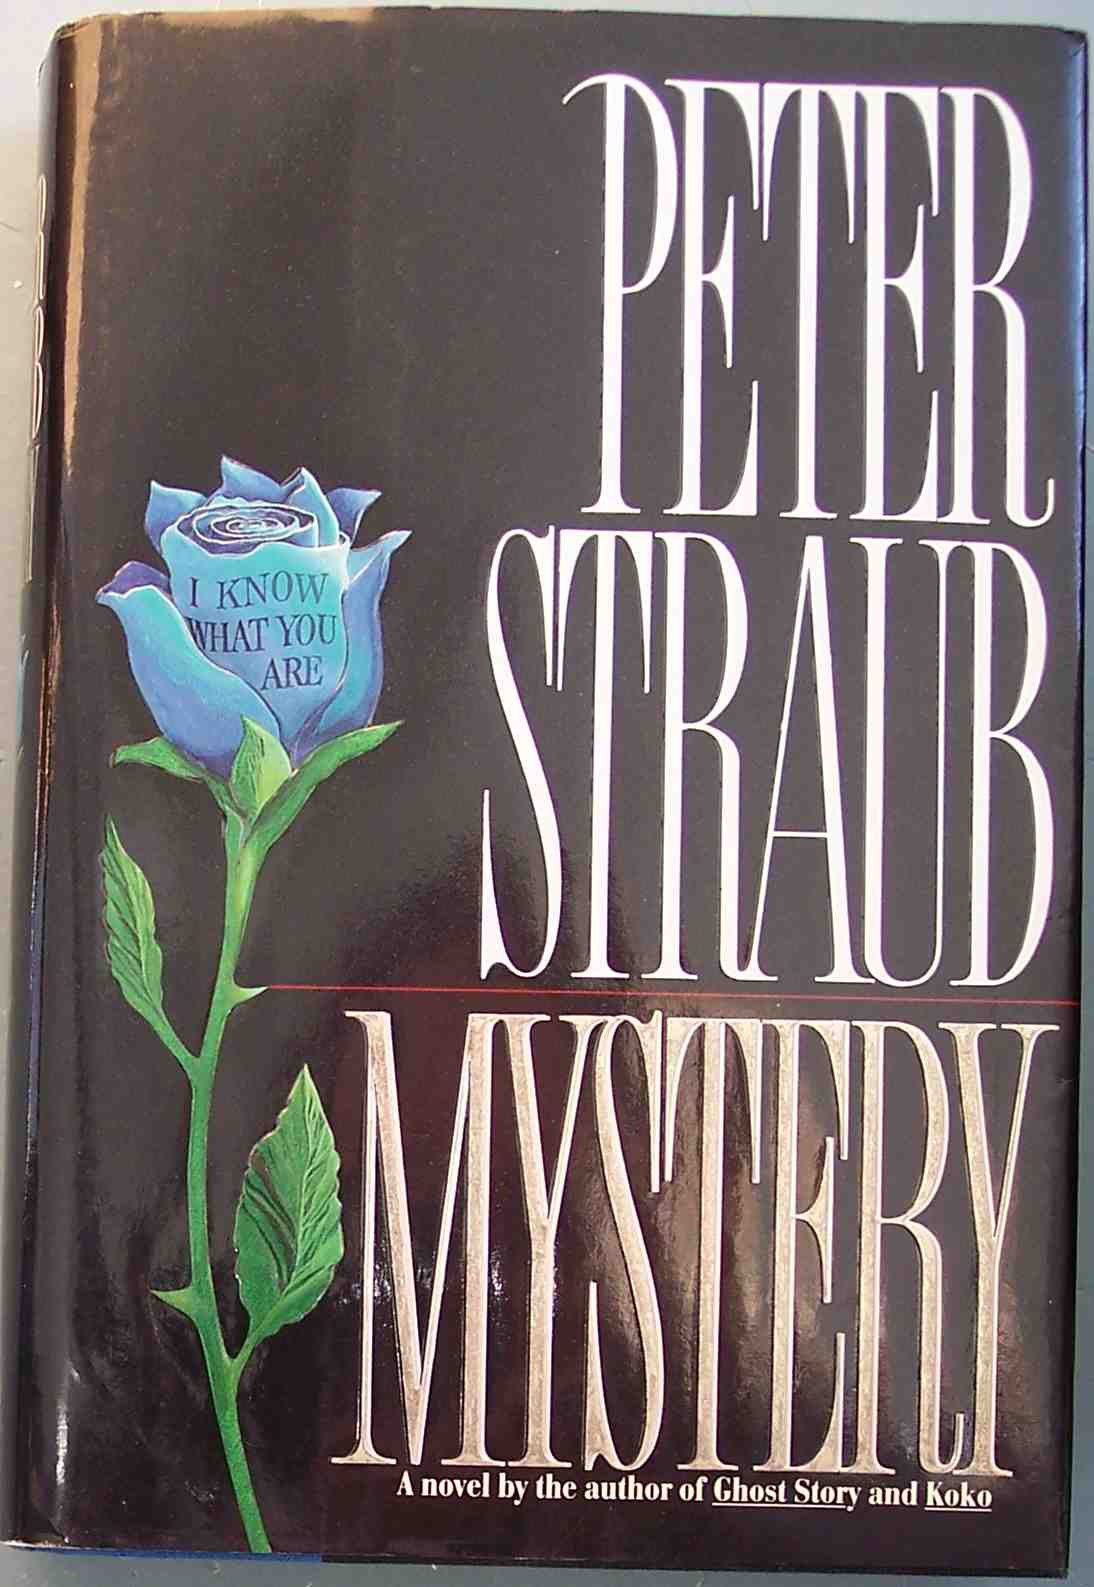 a paperback book about the story of peter staub, a mystery